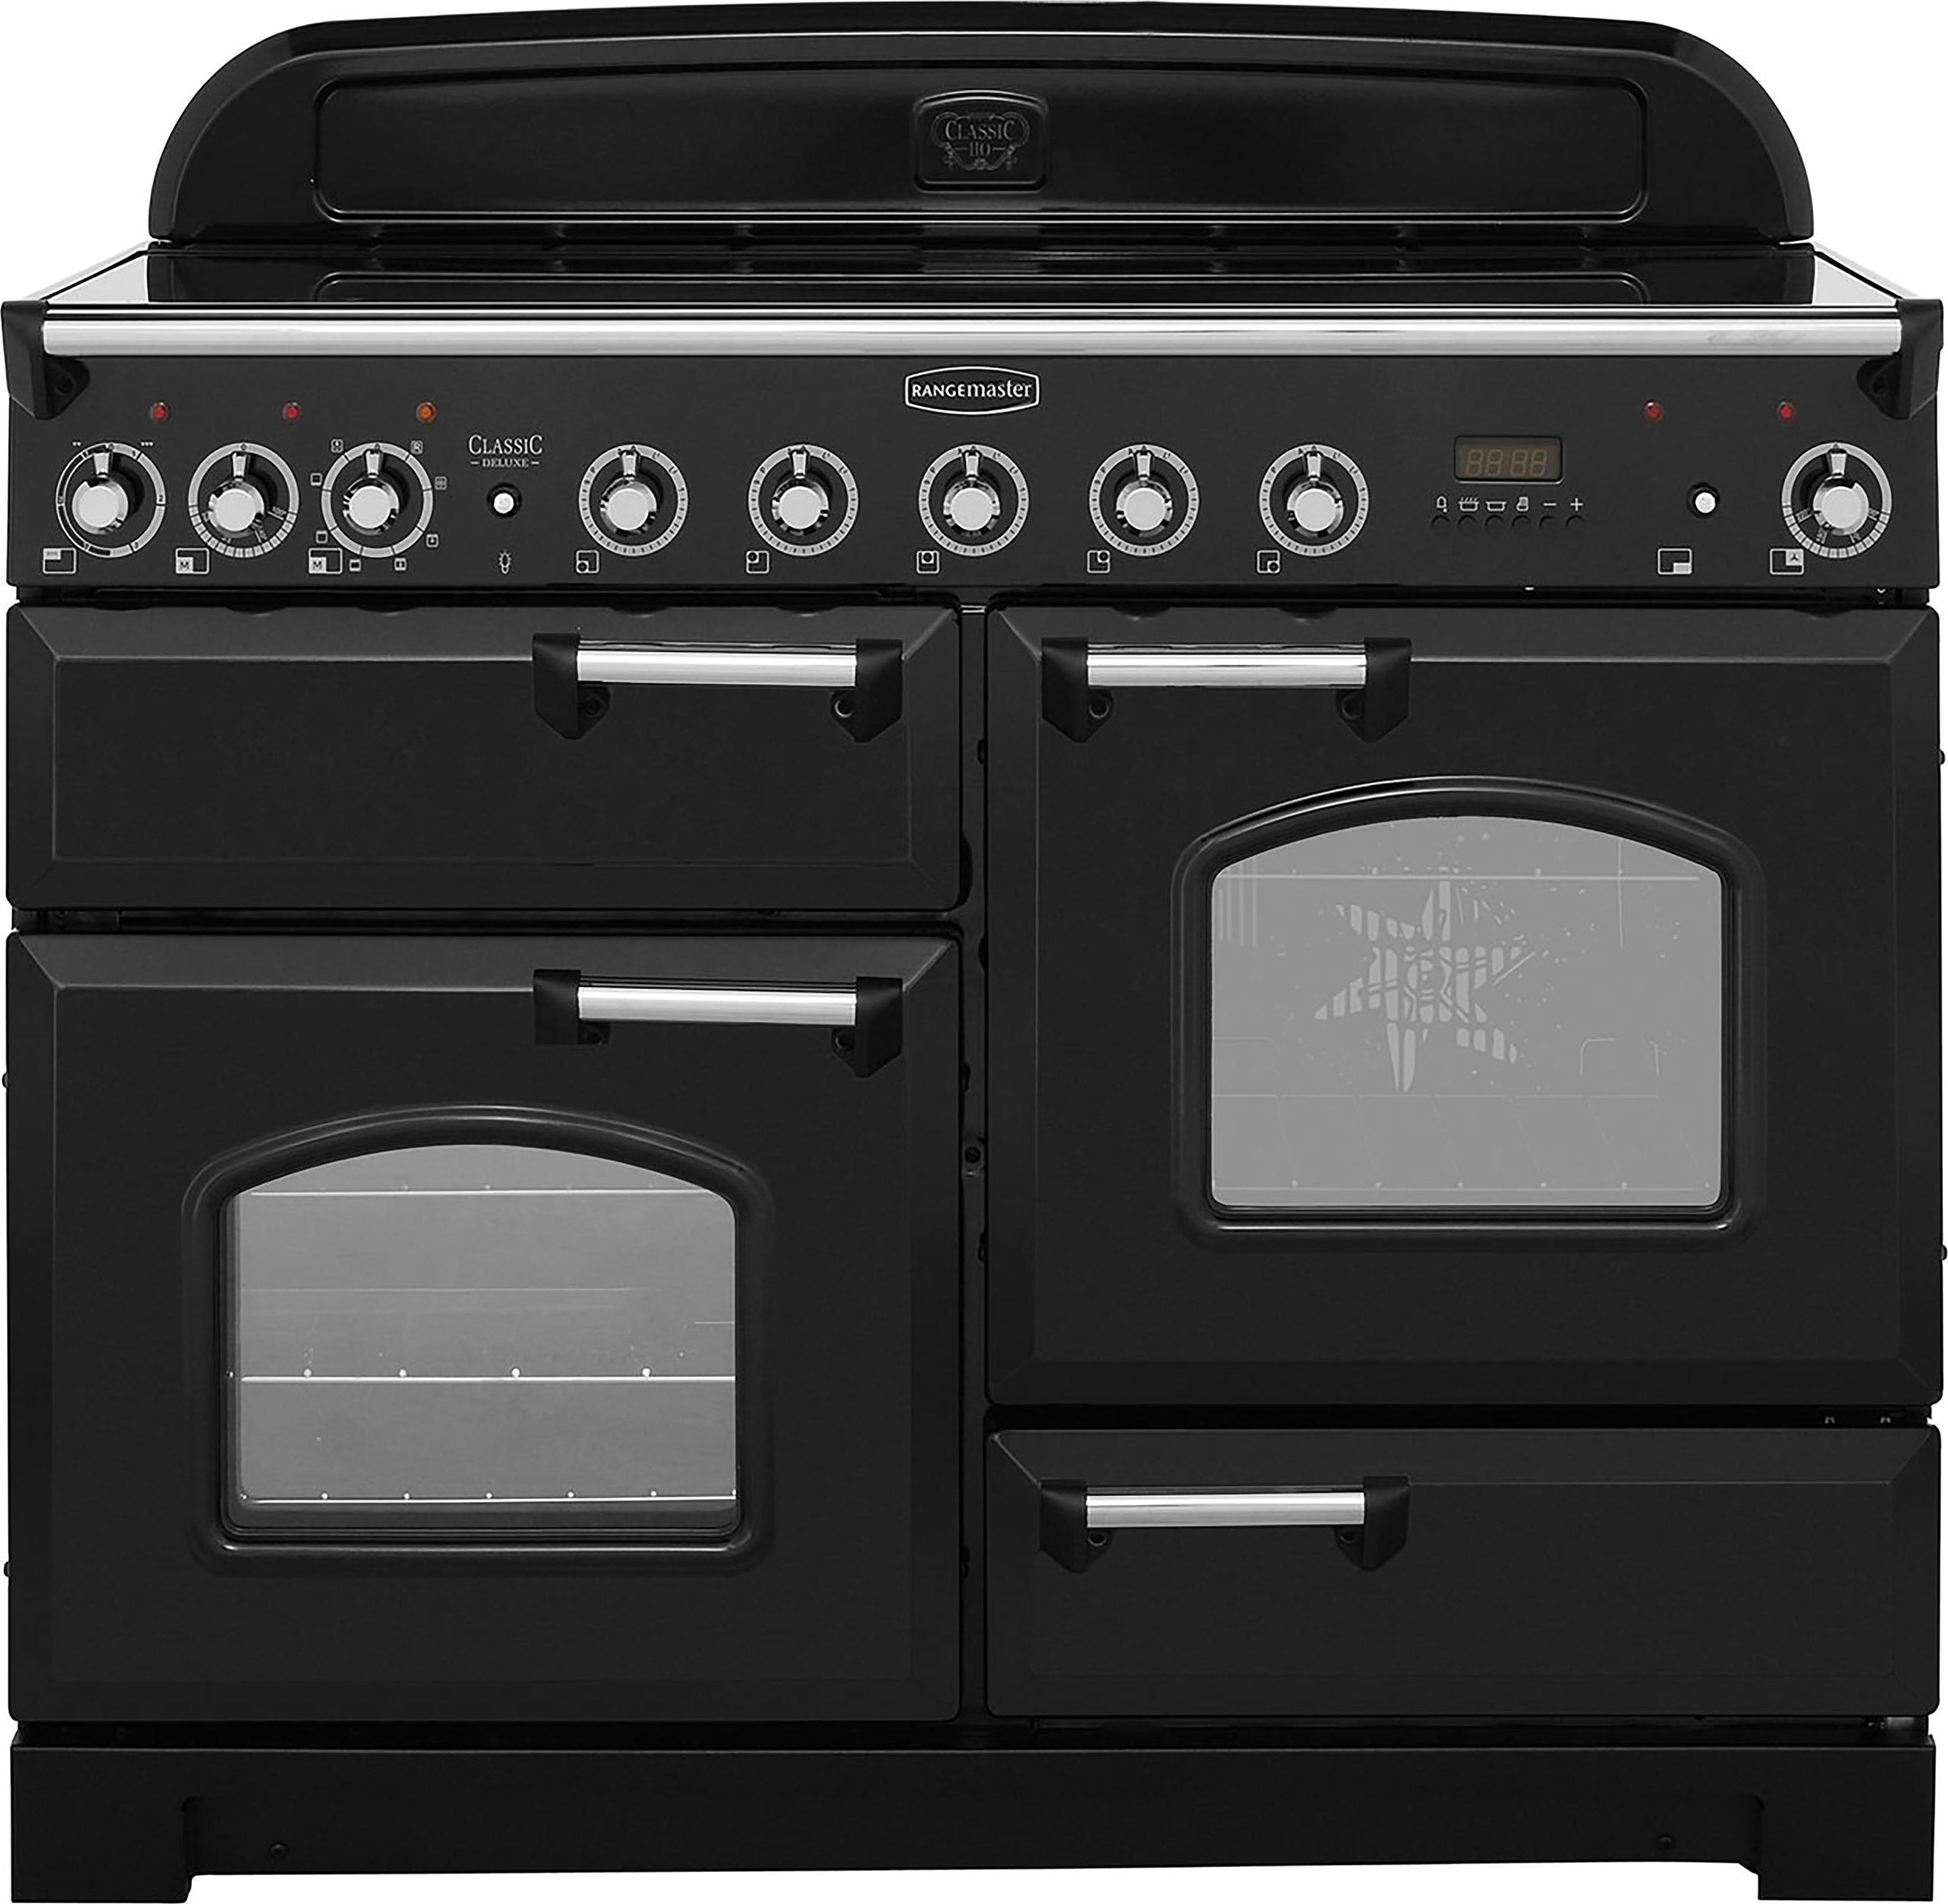 Rangemaster Classic Deluxe CDL110EIBL/C 110cm Electric Range Cooker with Induction Hob - Black / Chrome - A/A Rated, Black